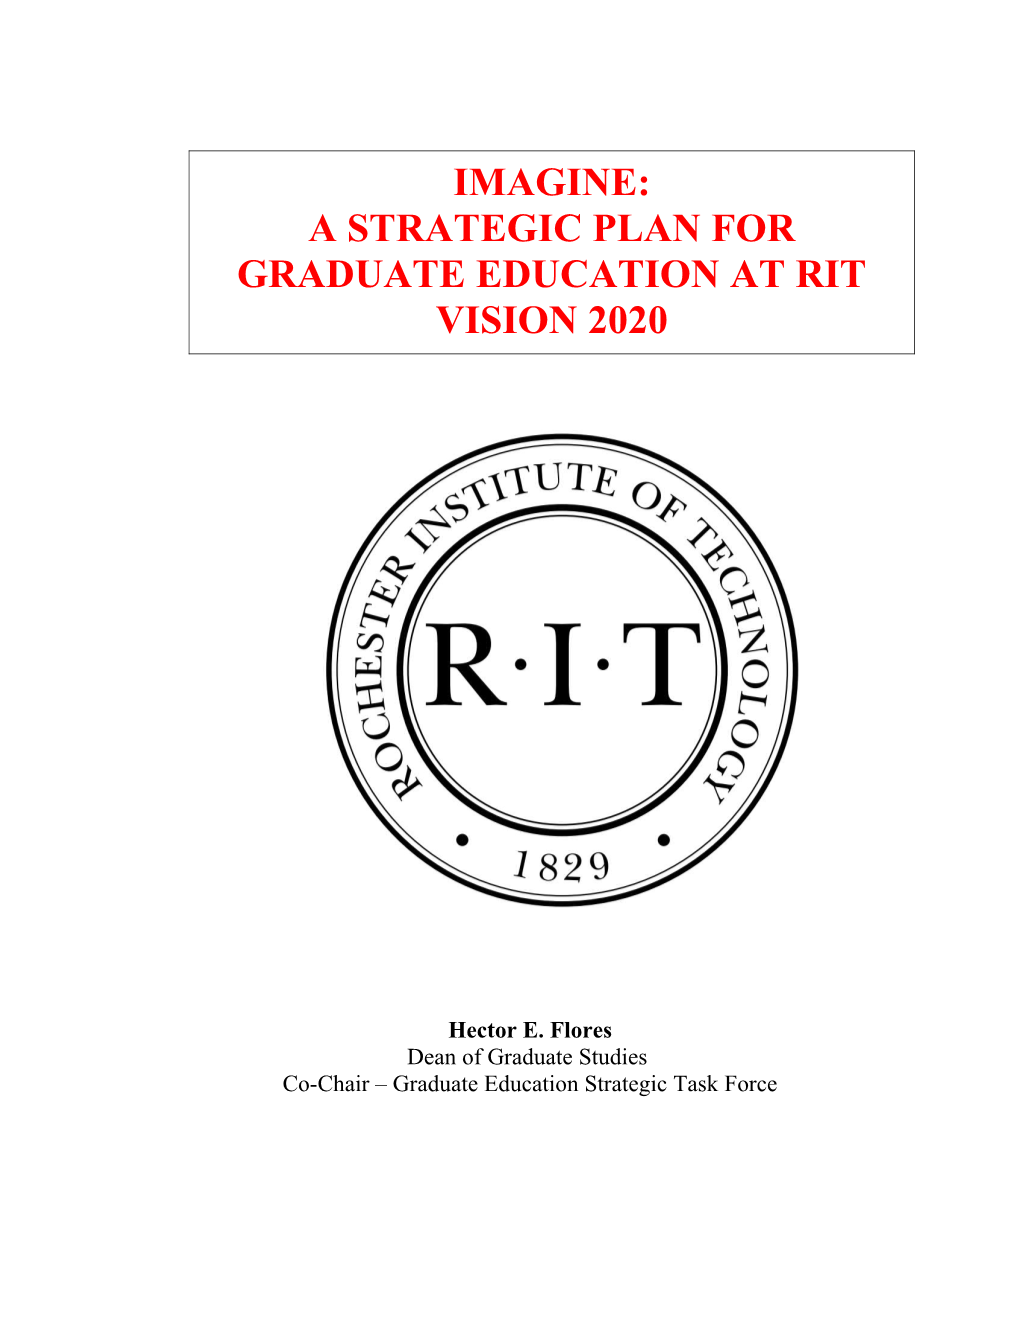 A Strategic Plan for Graduate Education at Rit